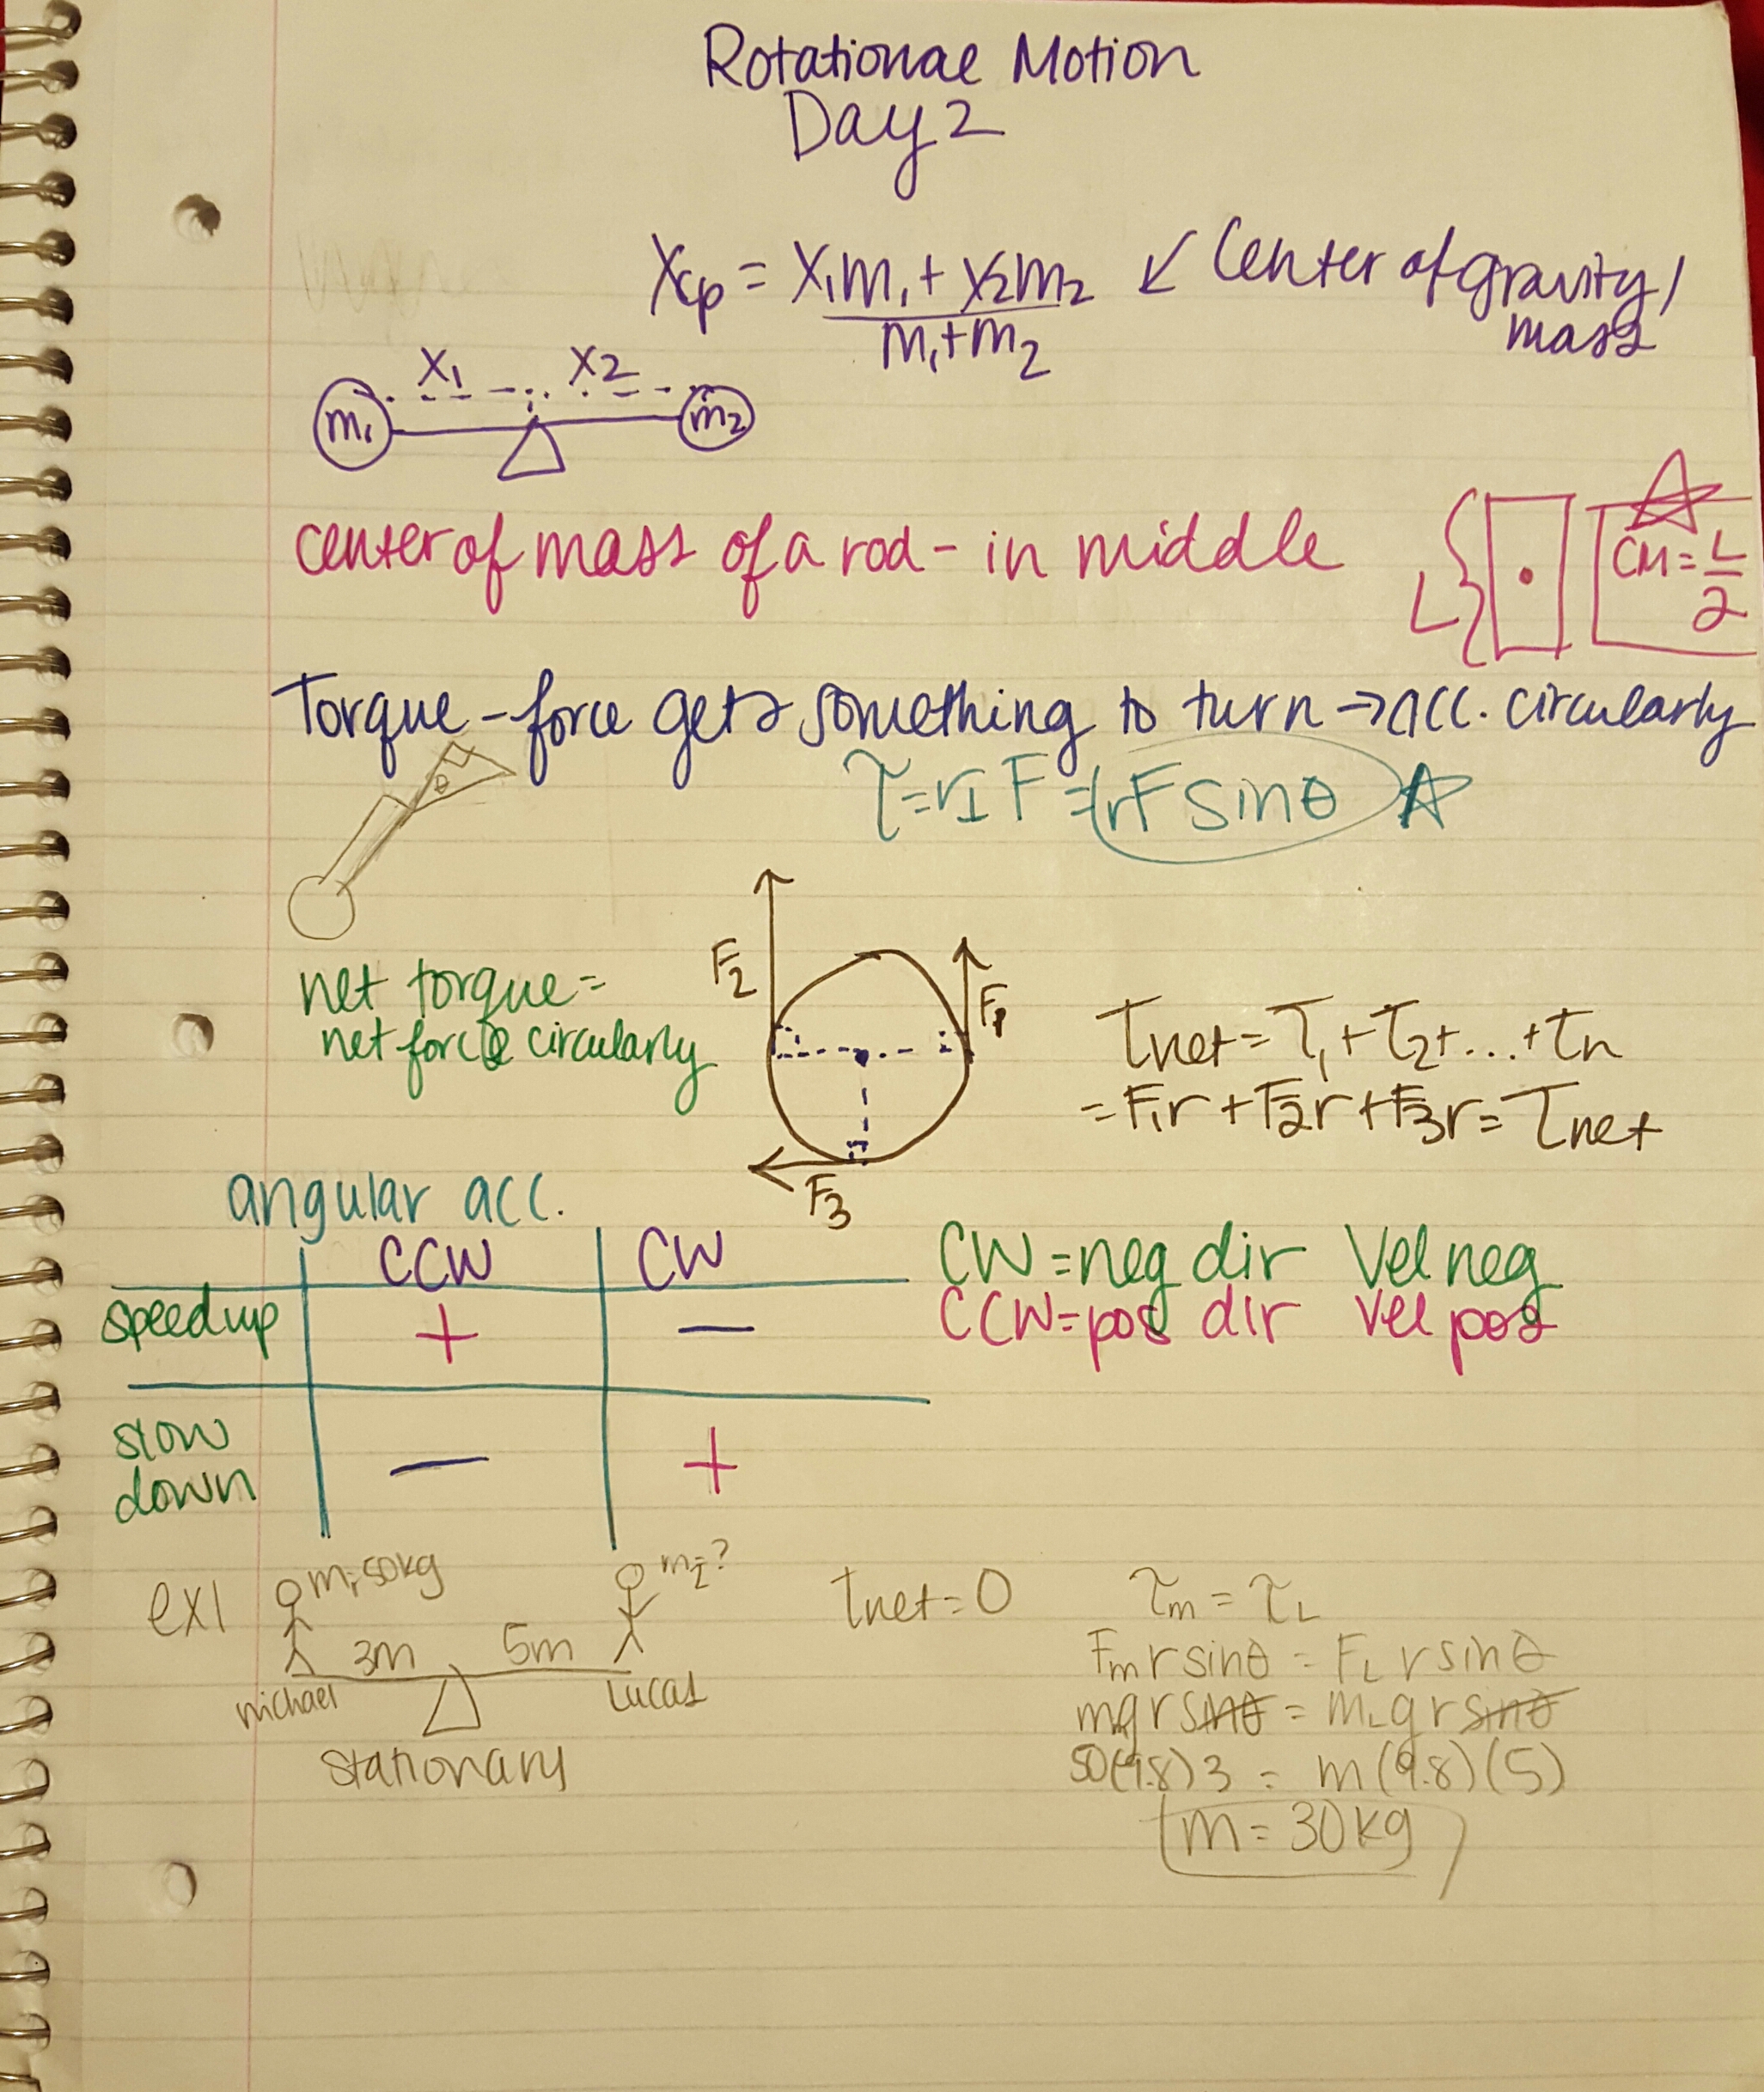 Rotary Motion Notes 2